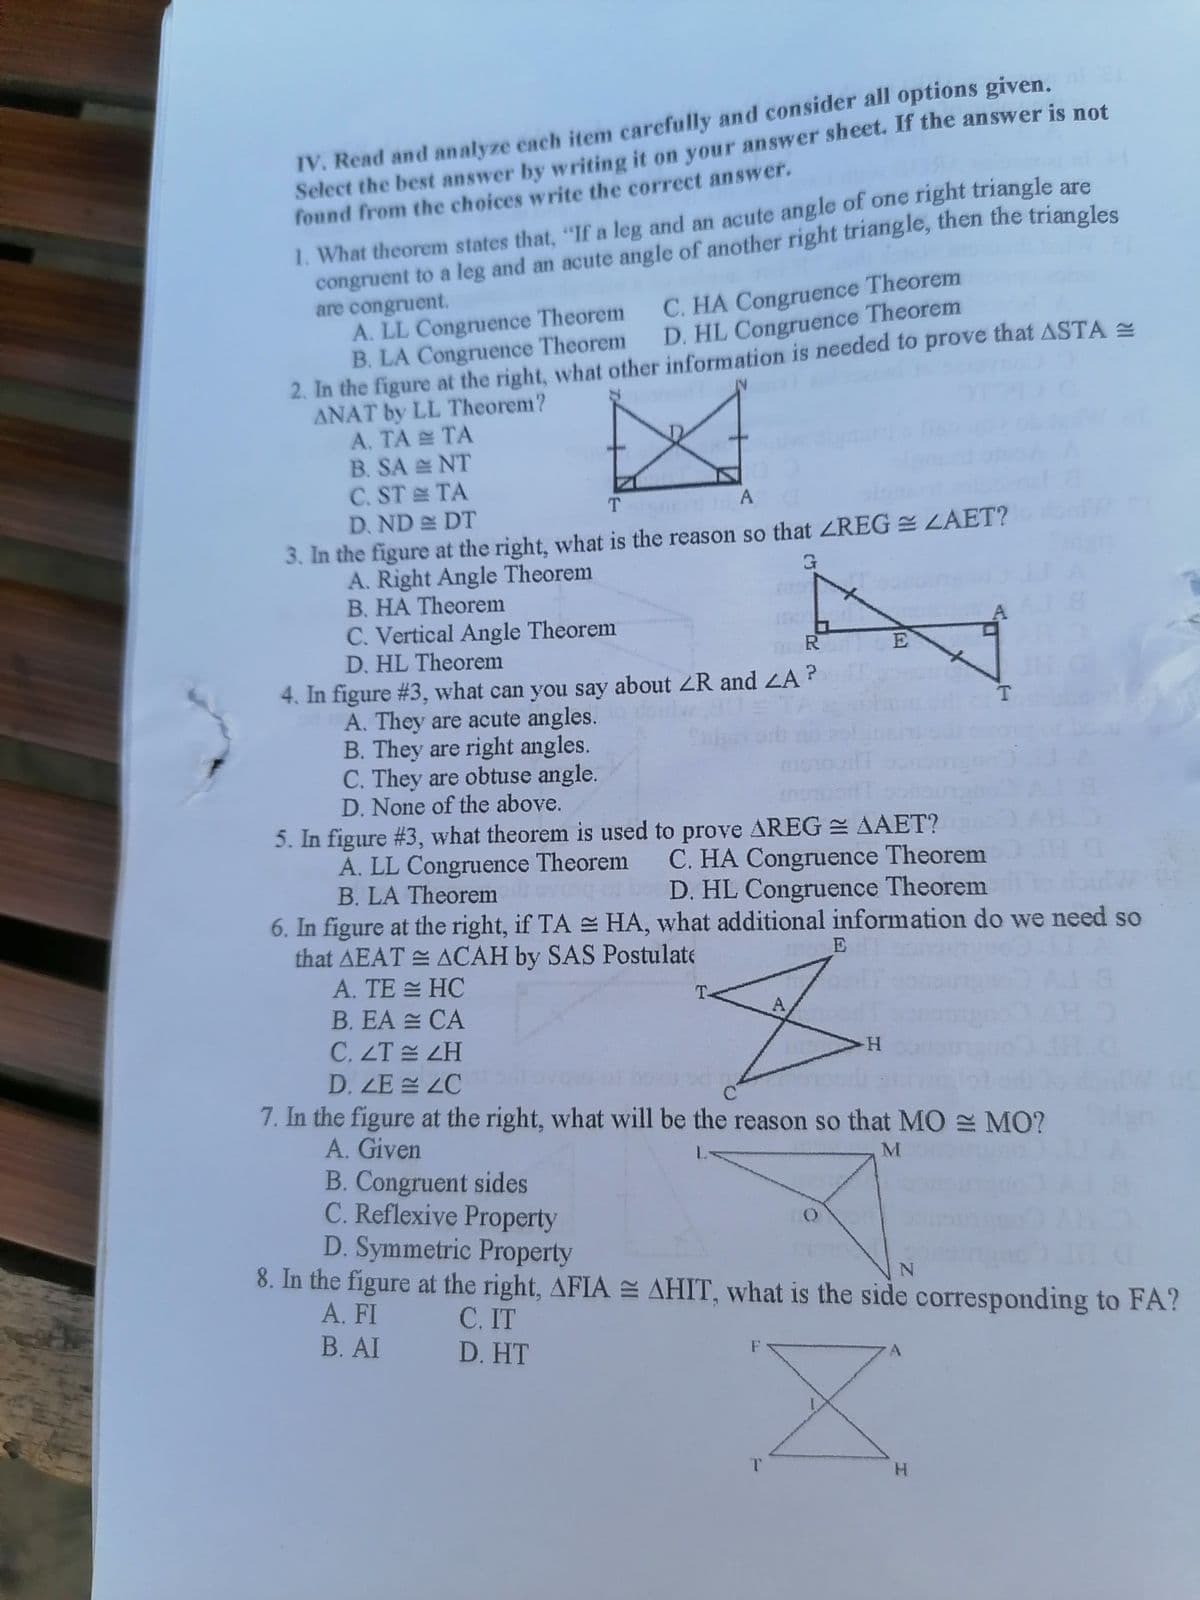 IV. Read and analyze each item carefully and consider all options given.
Select the best answer by writing it on your answer sheet. If the answer is not
found from the choices write the correct answer.
1. What theorem states that, "If a leg and an acute angle of one right triangle are
congruent to a leg and an acute angle of another right triangle, then the triangles
are congruent.
A. LL Congruence Theorem
B. LA Congruence Theorem
2. In the figure at the right, what other information is needed to prove that ASTA
ANAT by LL Theorem?
A. TA TA
B. SA NT
C. ST TA
D. ND DT
3. In the figure at the right, what is the reason so that ZREG LAET?
A. Right Angle Theorem
B. HA Theorem
C. Vertical Angle Theorem
D. HL Theorem
C. HA Congruence Theorem
D. HL Congruence Theorem
T.
A
R
4. In figure #3, what can you say about ZR and LA?
A. They are acute angles.
B. They are right angles.
C. They are obtuse angle.
D. None of the above.
T.
5. In figure #3, what theorem is used to prove AREG = AAET?
A. LL Congruence Theorem C. HA Congruence Theorem
B. LA Theorem
D. HL Congruence Theorem
6. In figure at the right, if TA HA, what additional information do we need so
that AEAT E ACAH by SAS Postulate
A. TE = HC
E
T-
B. EA = CA
A,
C. ZT LH
D. ZE ZC
7. In the figure at the right, what will be the reason so that MO = MO?
A. Given
B. Congruent sides
C. Reflexive Property
D. Symmetric Property
8. In the figure at the right, AFIA E AHIT, what is the side corresponding to FA?
A. FI
С. IT
D. HT
В. AI
T.
H.
